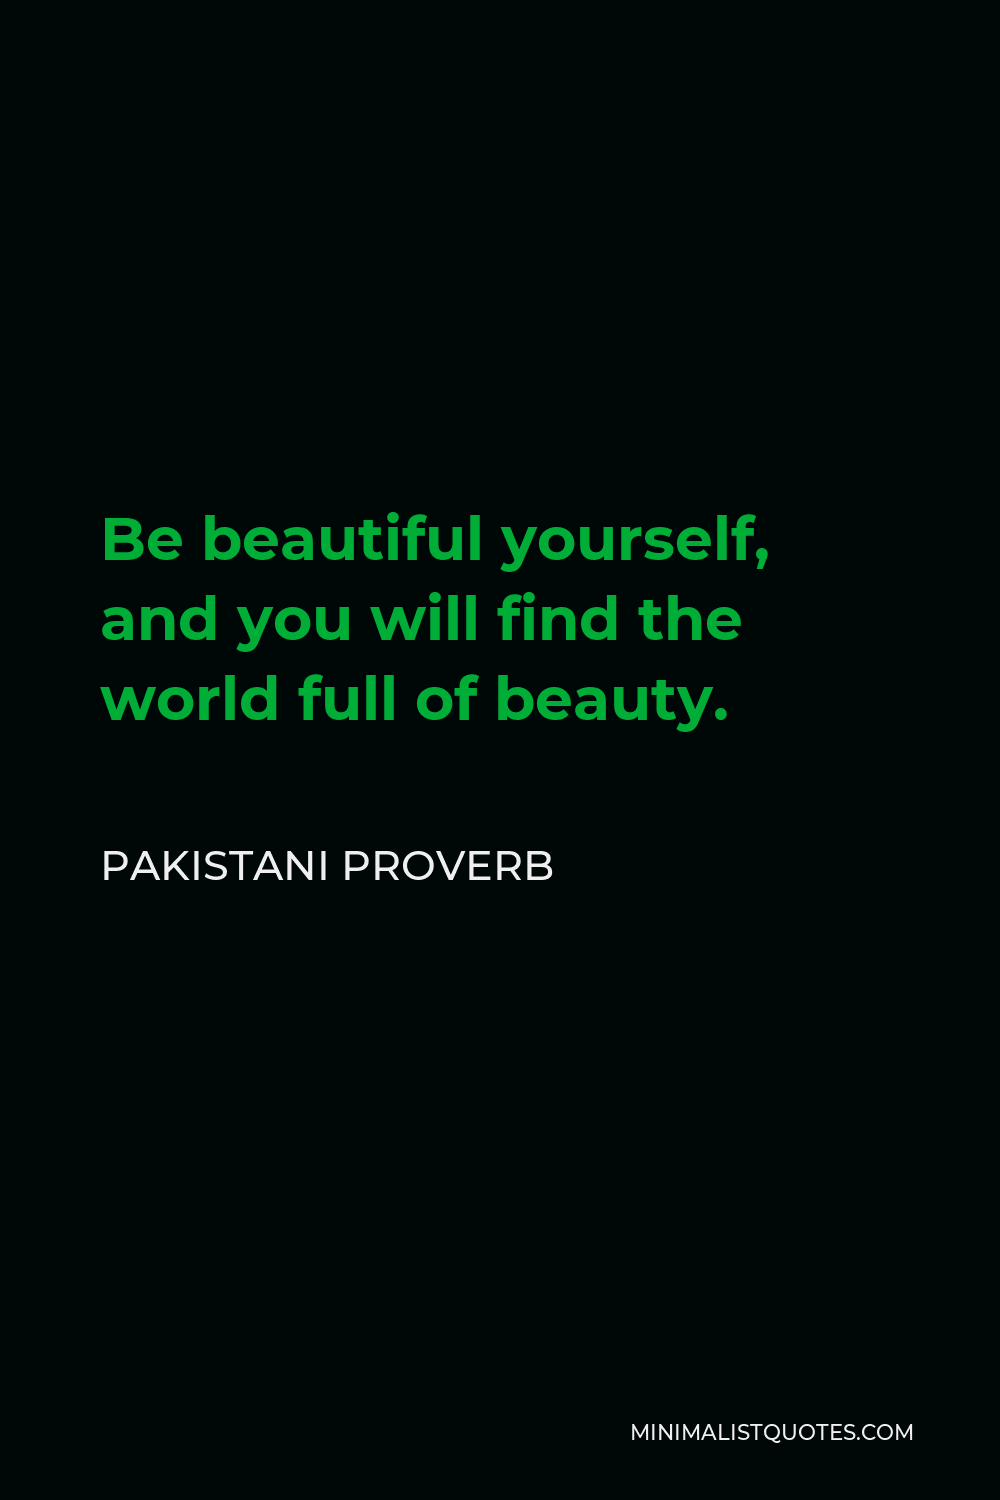 Pakistani Proverb Quote - Be beautiful yourself, and you will find the world full of beauty.